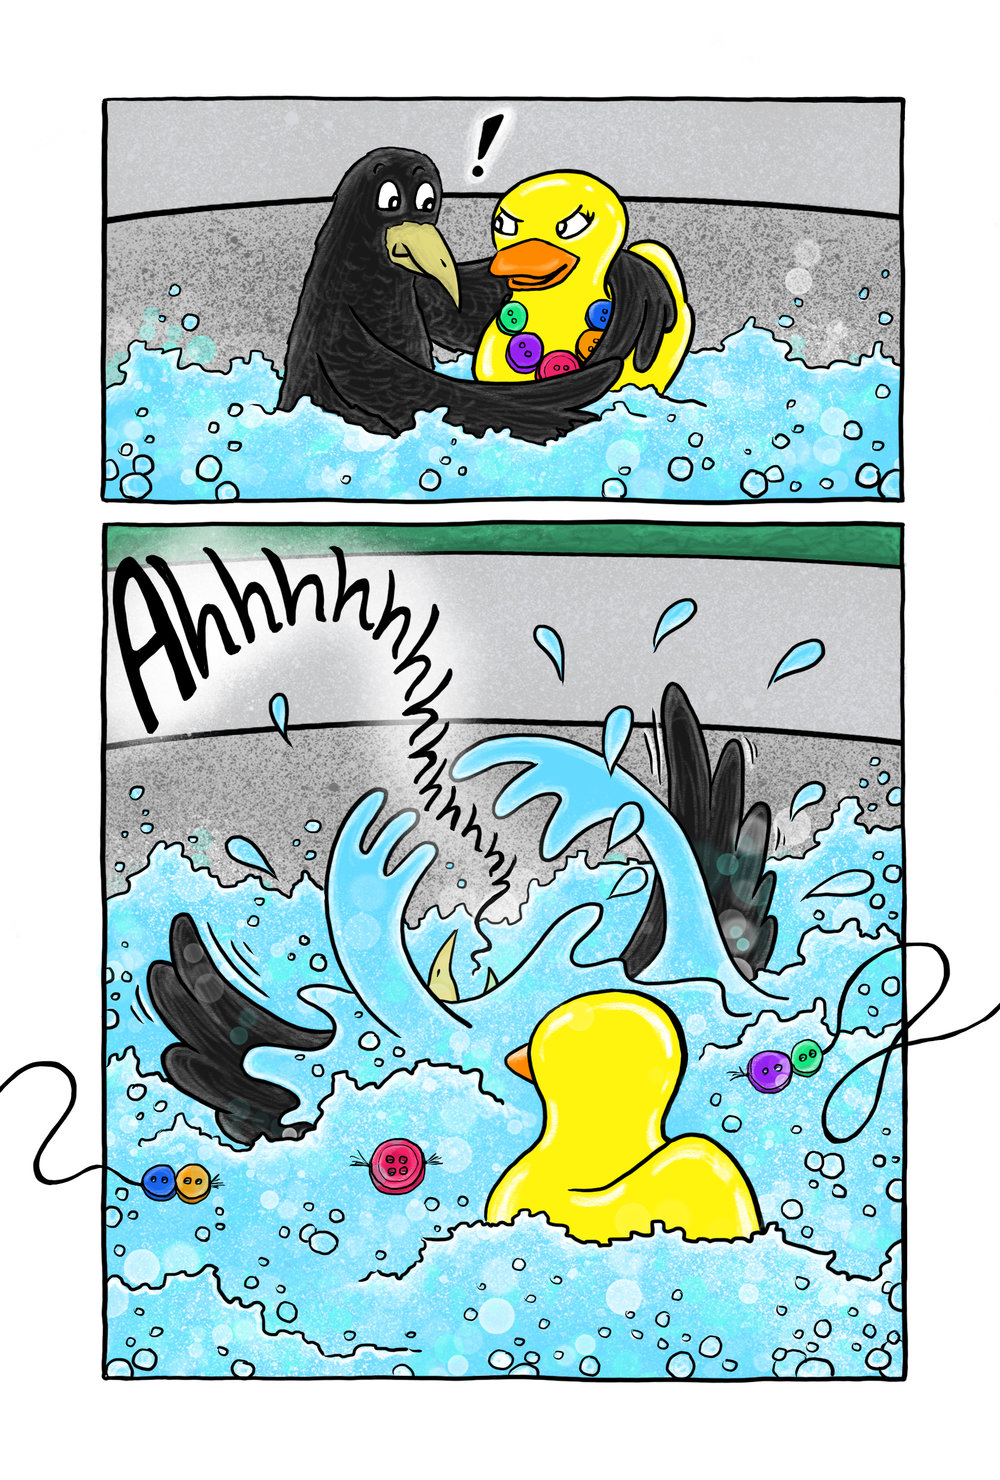 Page 6 the duck changes her expression for the first time and releases her fury